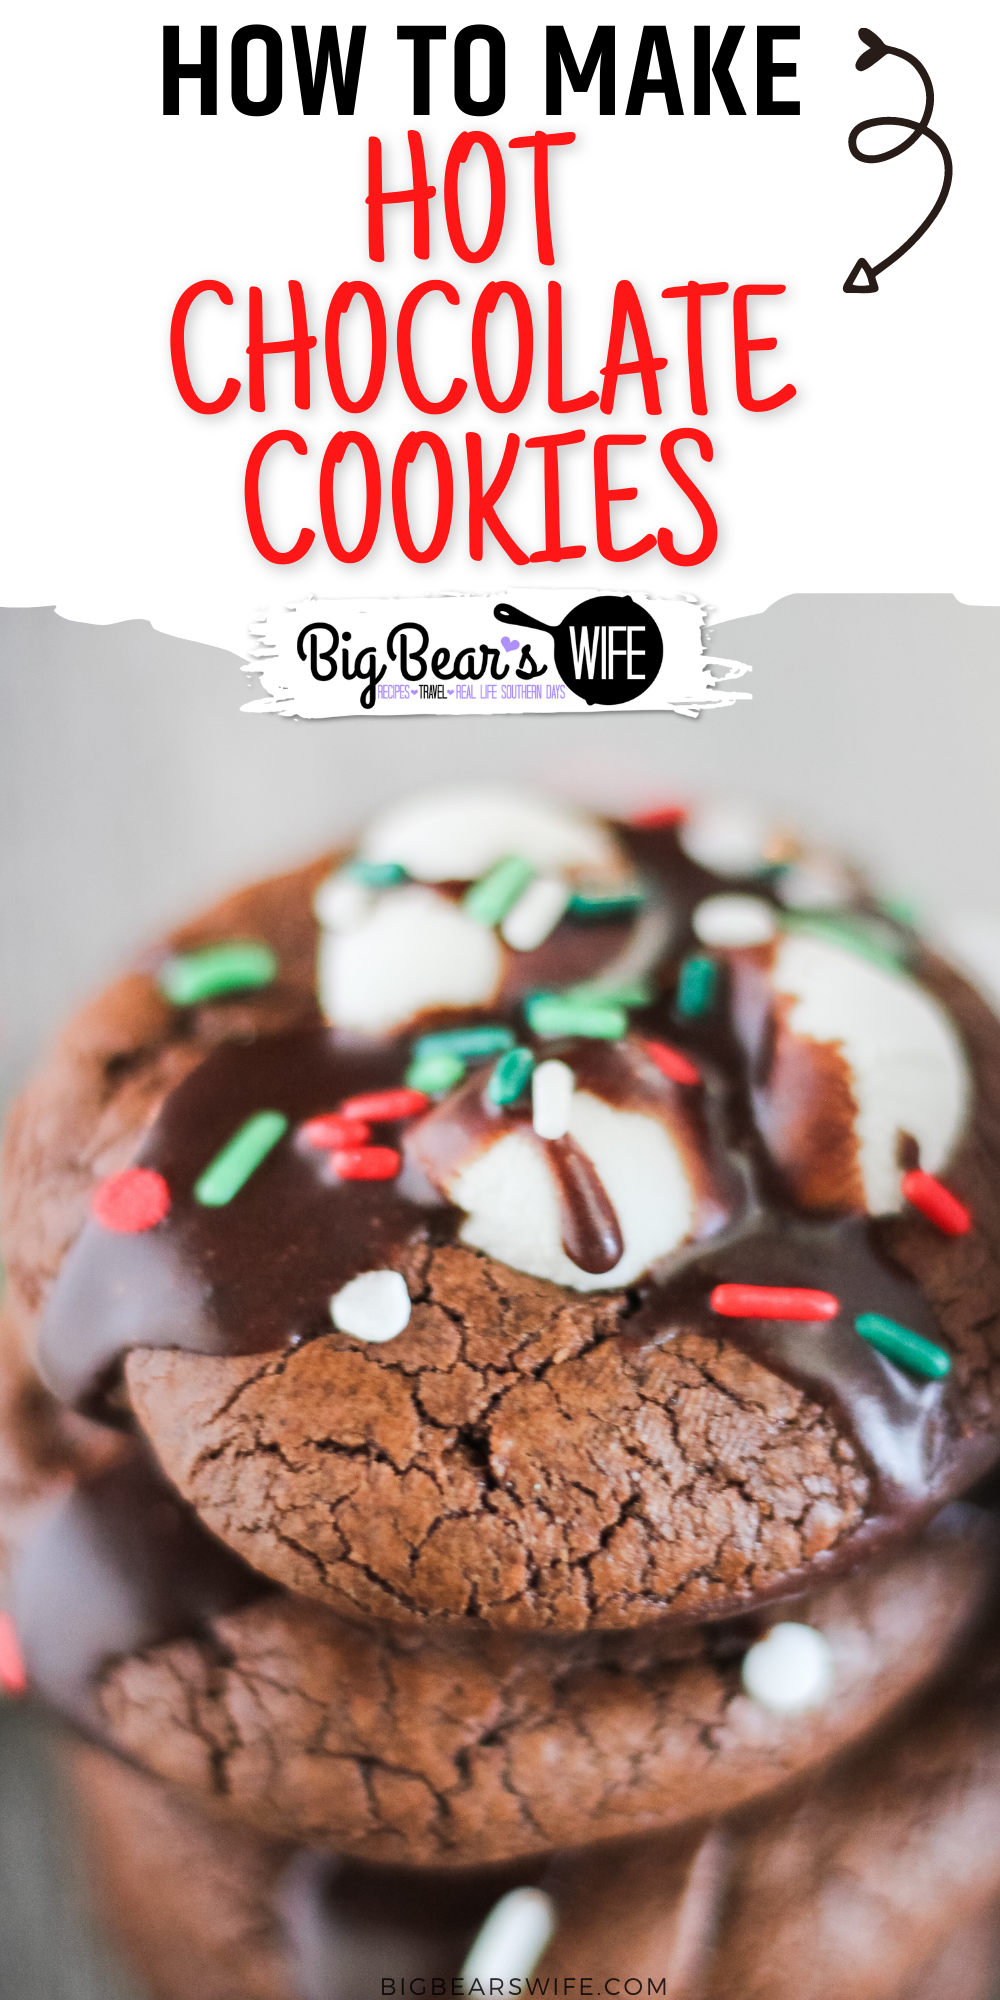  Hot Chocolate Cookies -- Hot Chocolate Cookies are so popular in our family that I end up making dozens and dozens for family members during the holidays! They're rich chocolate cookies with melted marshmallows stacked on top with a chocolate glaze drizzle and sprinkles to finish them off.   via @bigbearswife